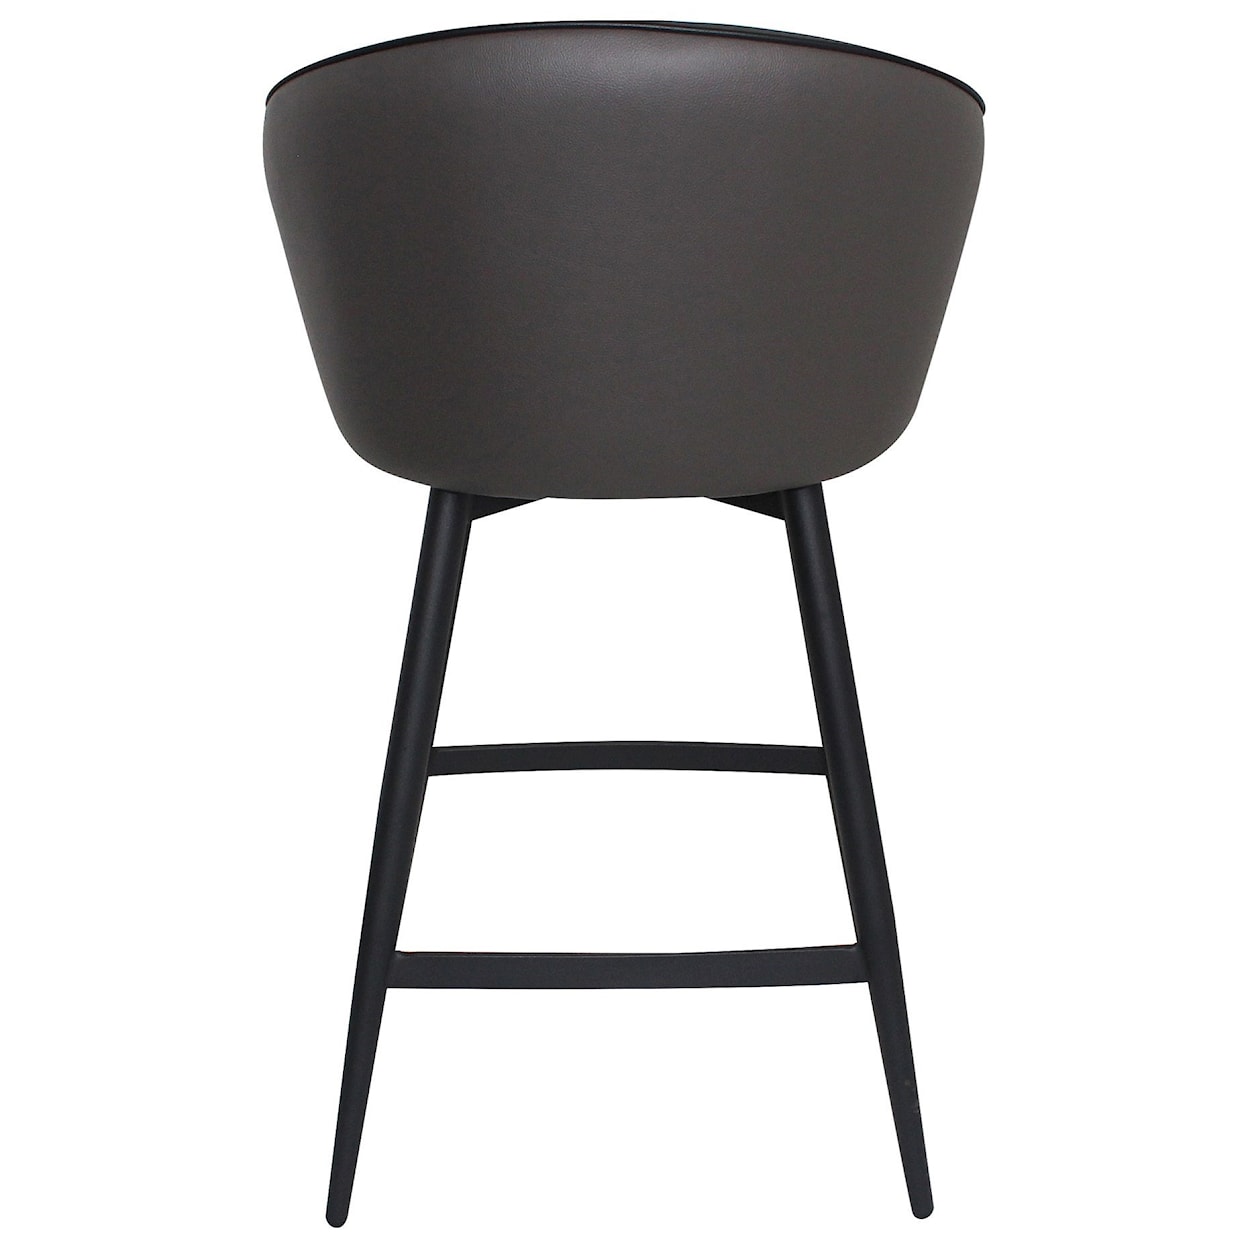 Moe's Home Collection Webber Charcoal Counter Stool